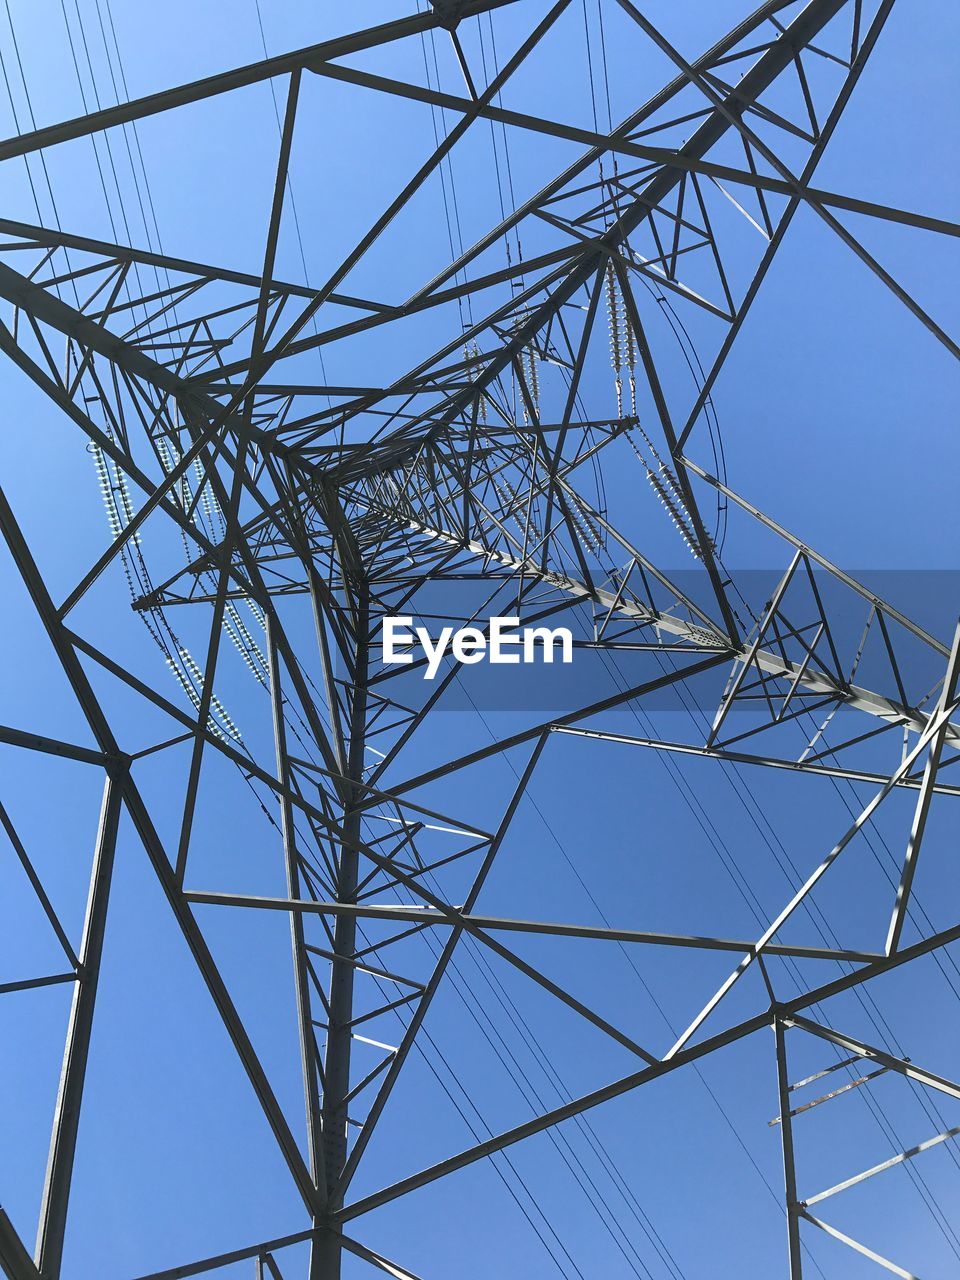 CLOSE-UP LOW ANGLE VIEW OF ELECTRICITY PYLON